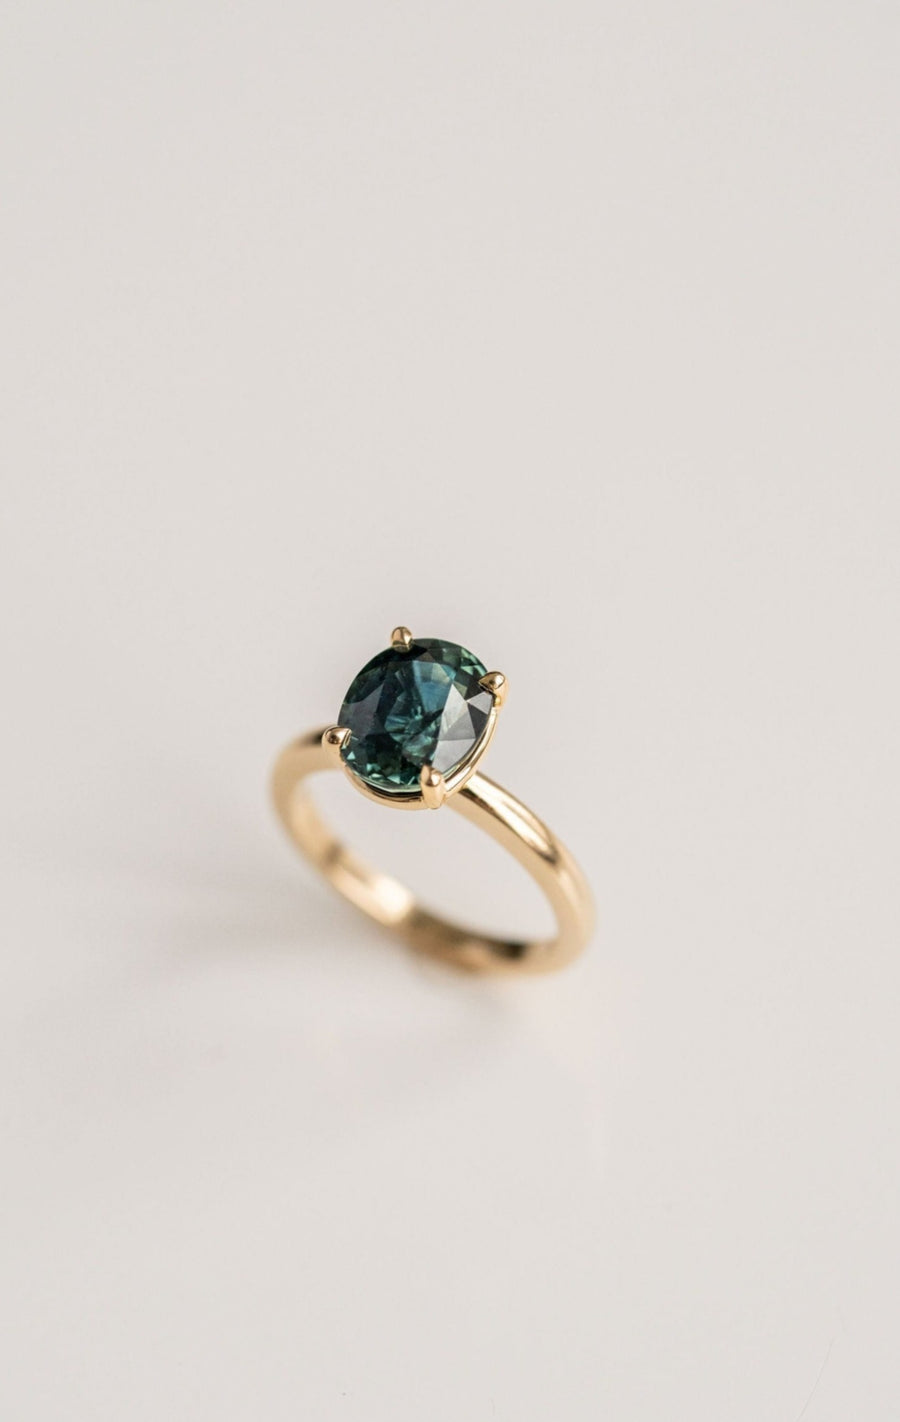 3.97ct. Oval West Coast Green Sri Lankan Sapphire Solitaire, 14k Yellow Gold